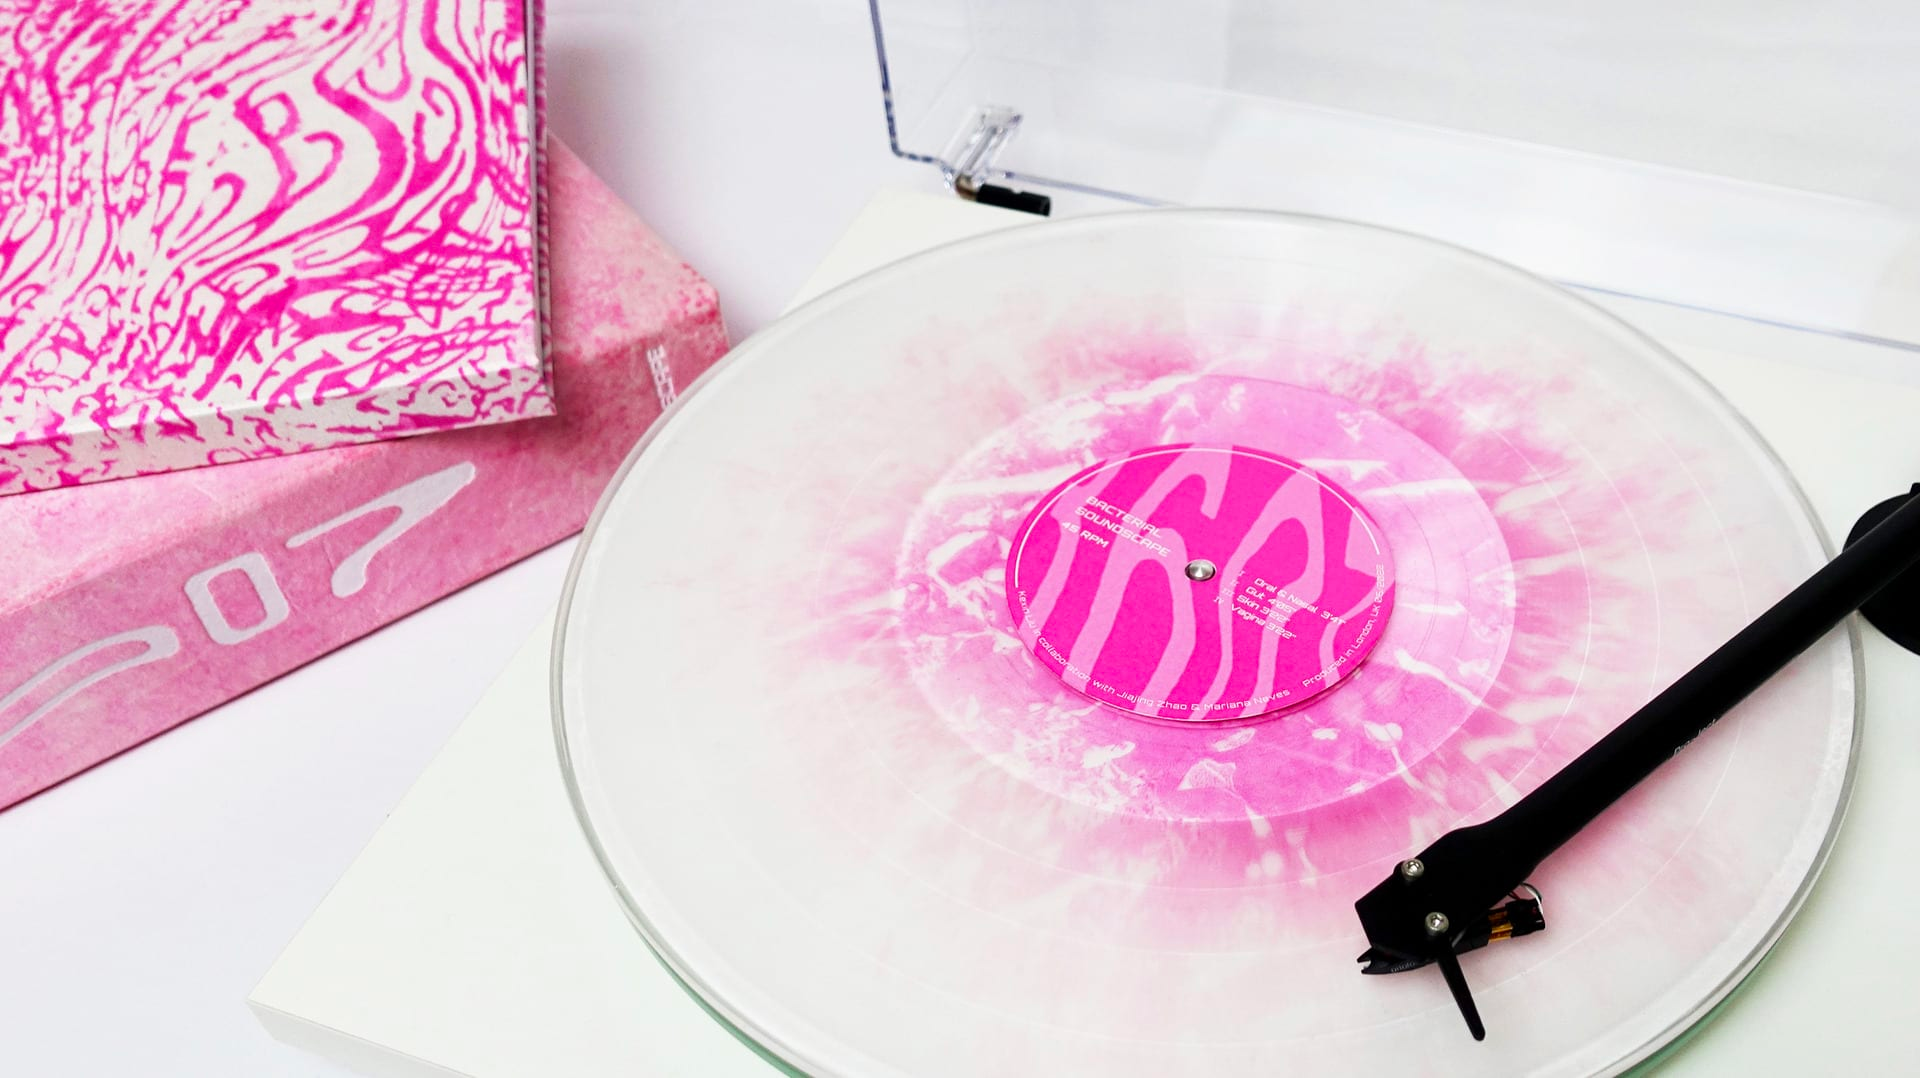 Close-up image of a white record player turntable with a black tone arm playing a pink and white or clear record, with the corners of two stacked pink and white shallow boxes next to it.